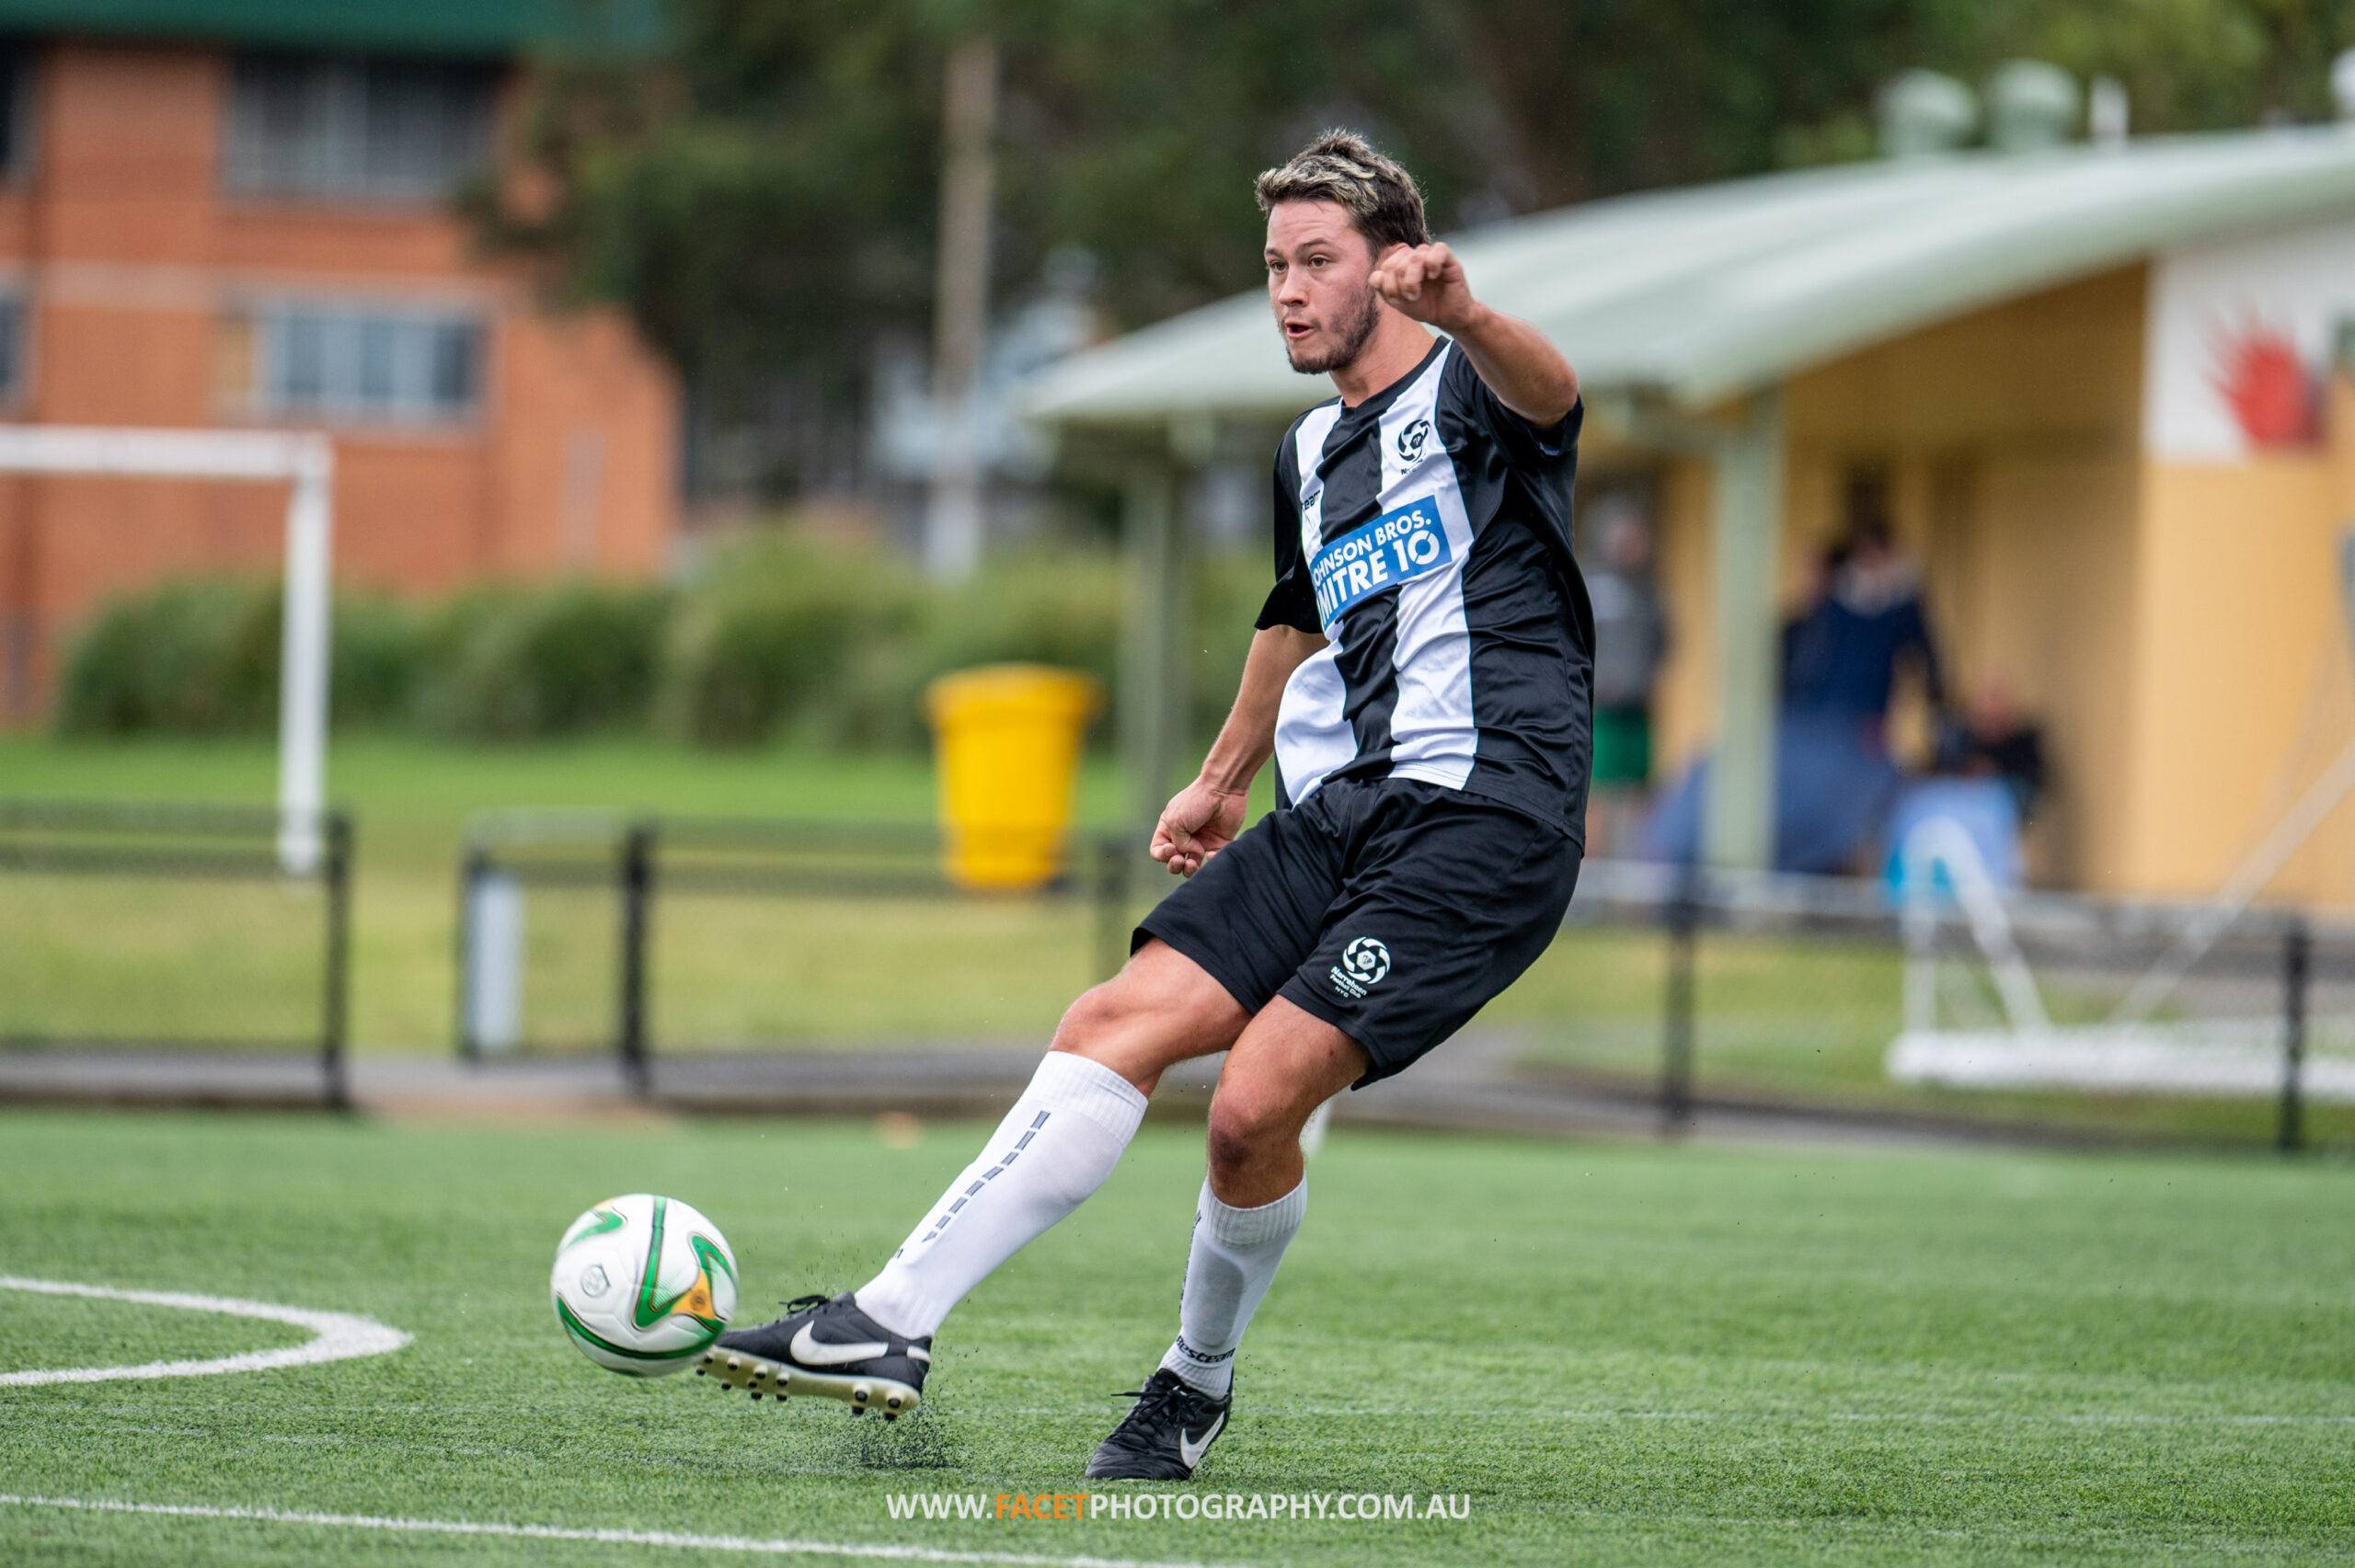 Men's Premier League Round 10: Action from the 2023 Round 4 MWFA Men's Premier League game between Narrabeen and Pittwater RSL at Cromer Park. Photo credit: Jeremy Denham